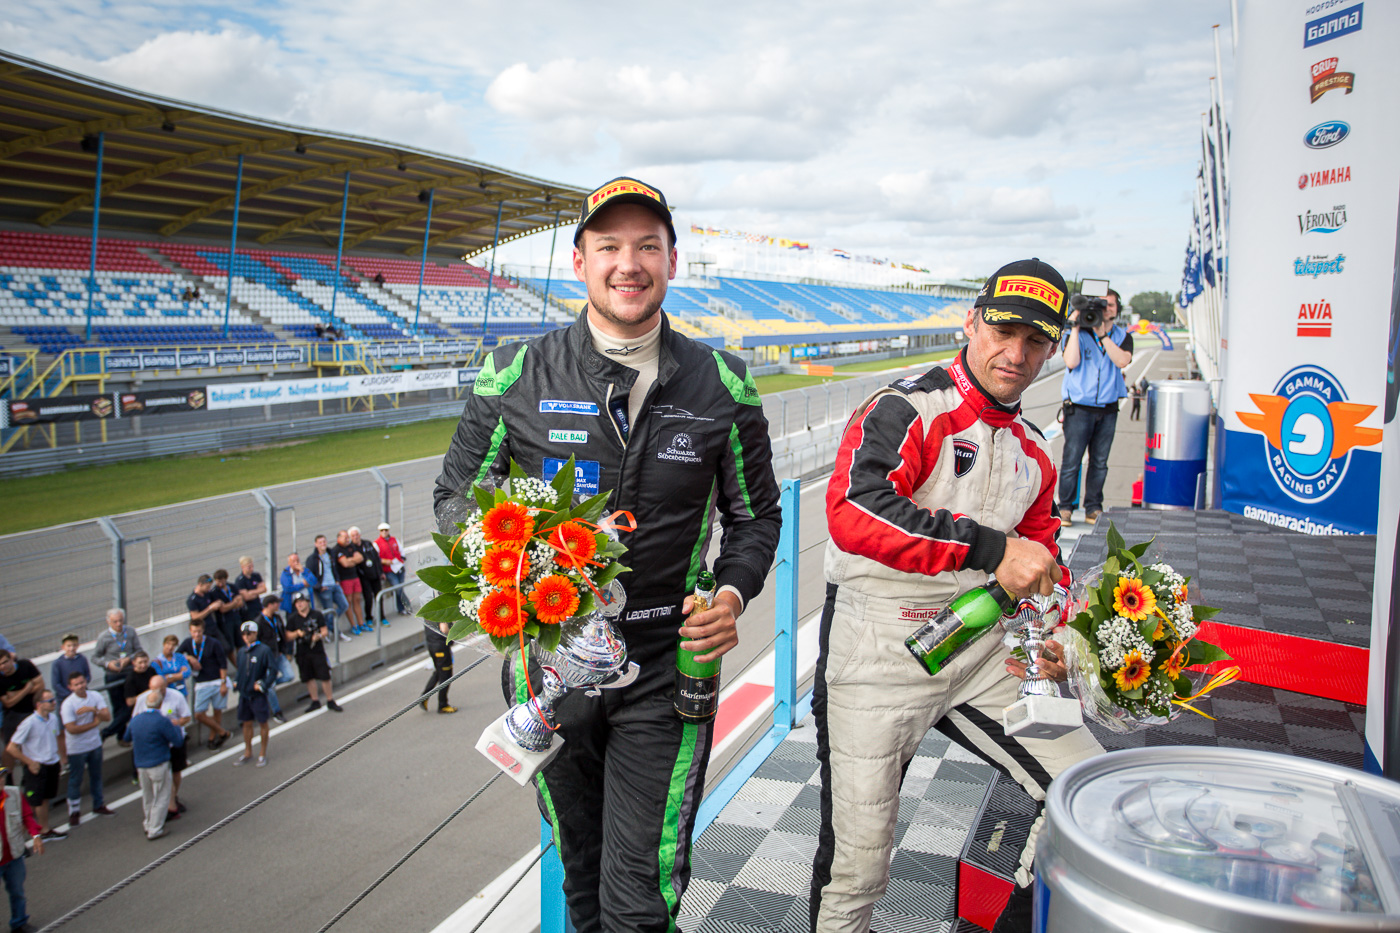 Ledermair wins race and P1 in Assen 2017 at race 1.